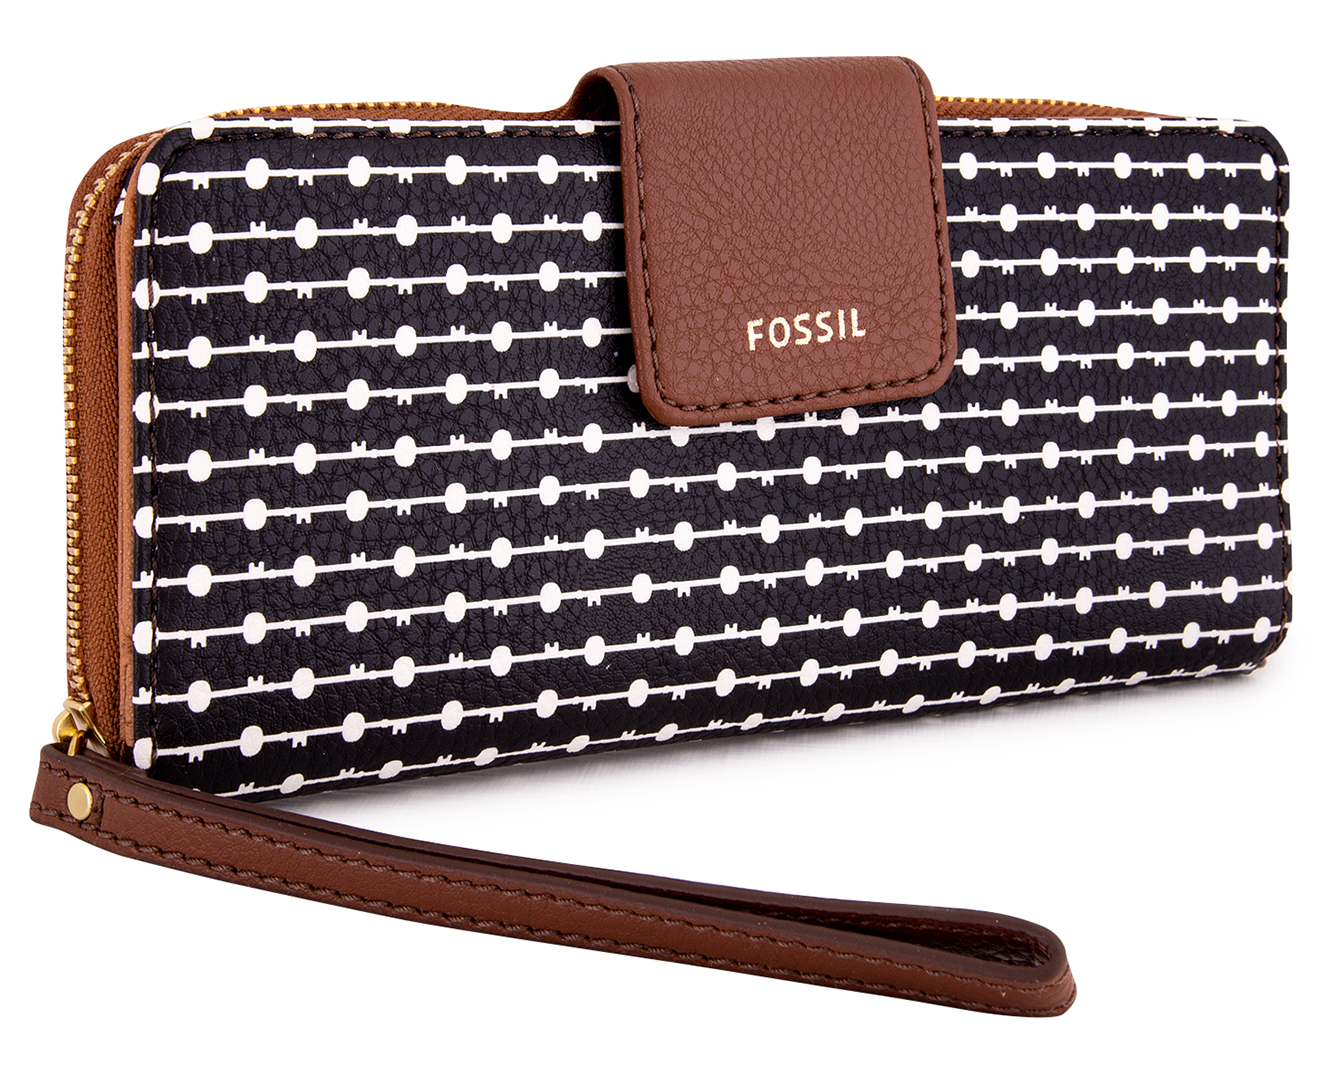 Fossil Madison Zip Clutch Wallet - Black/White | Deals Shopping